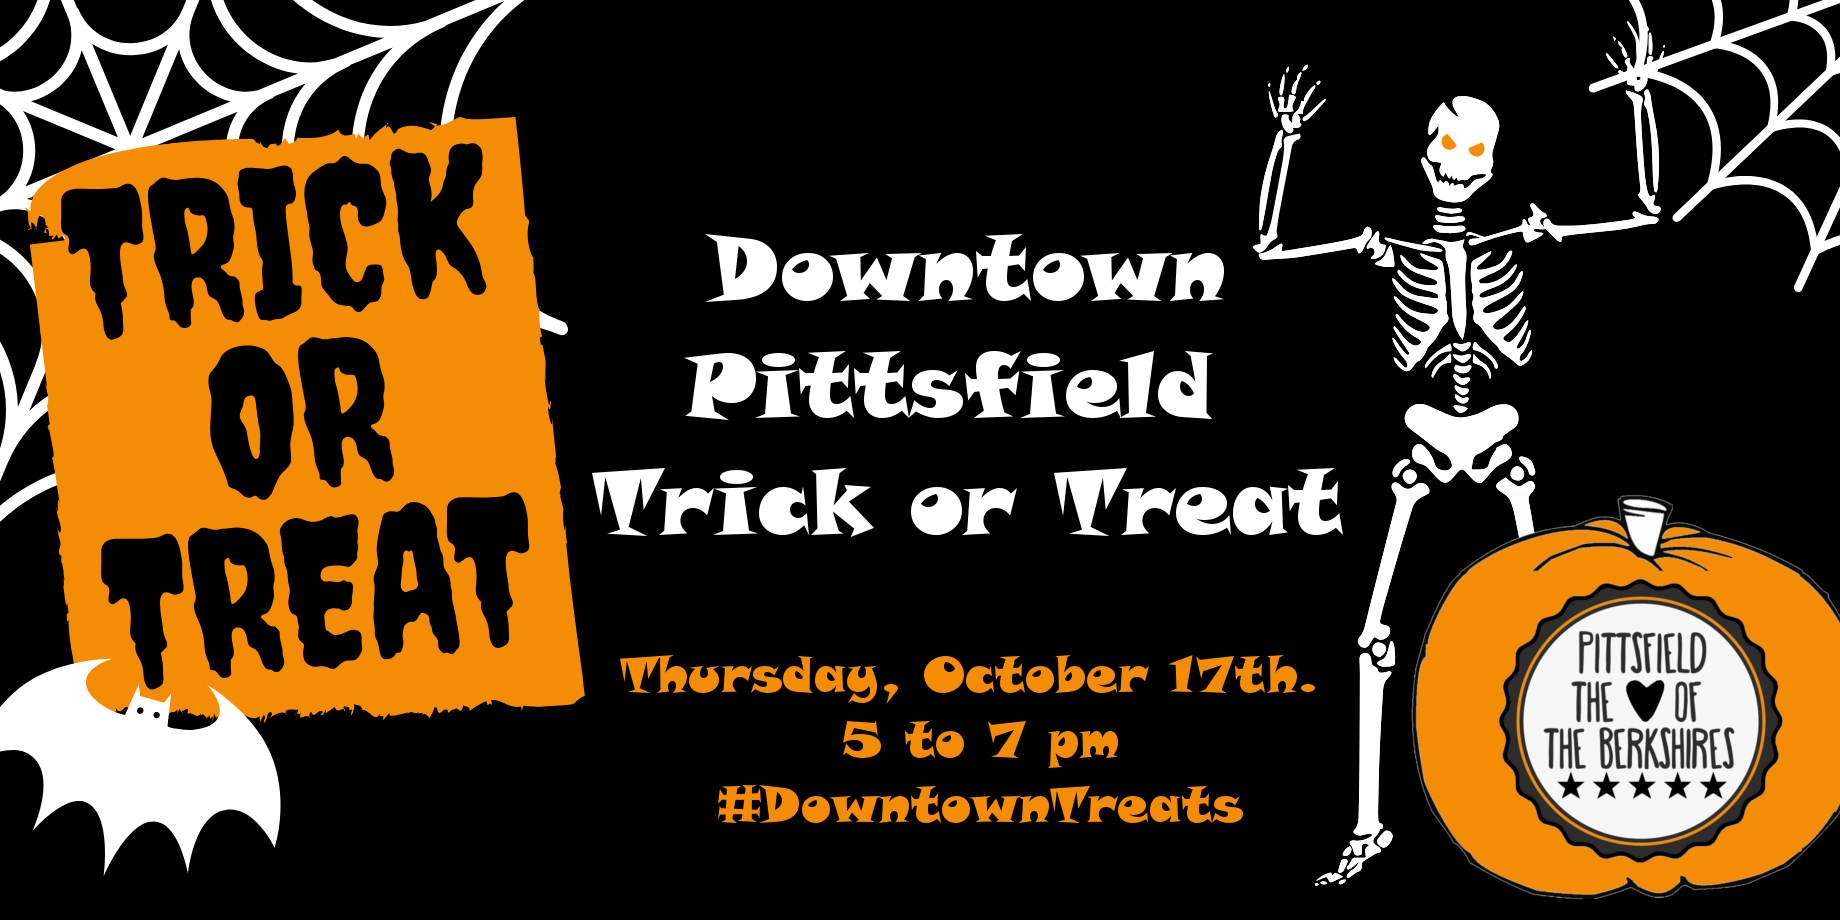 Downtown Pittsfield Trick or Treat to be held on Thursday, October 17